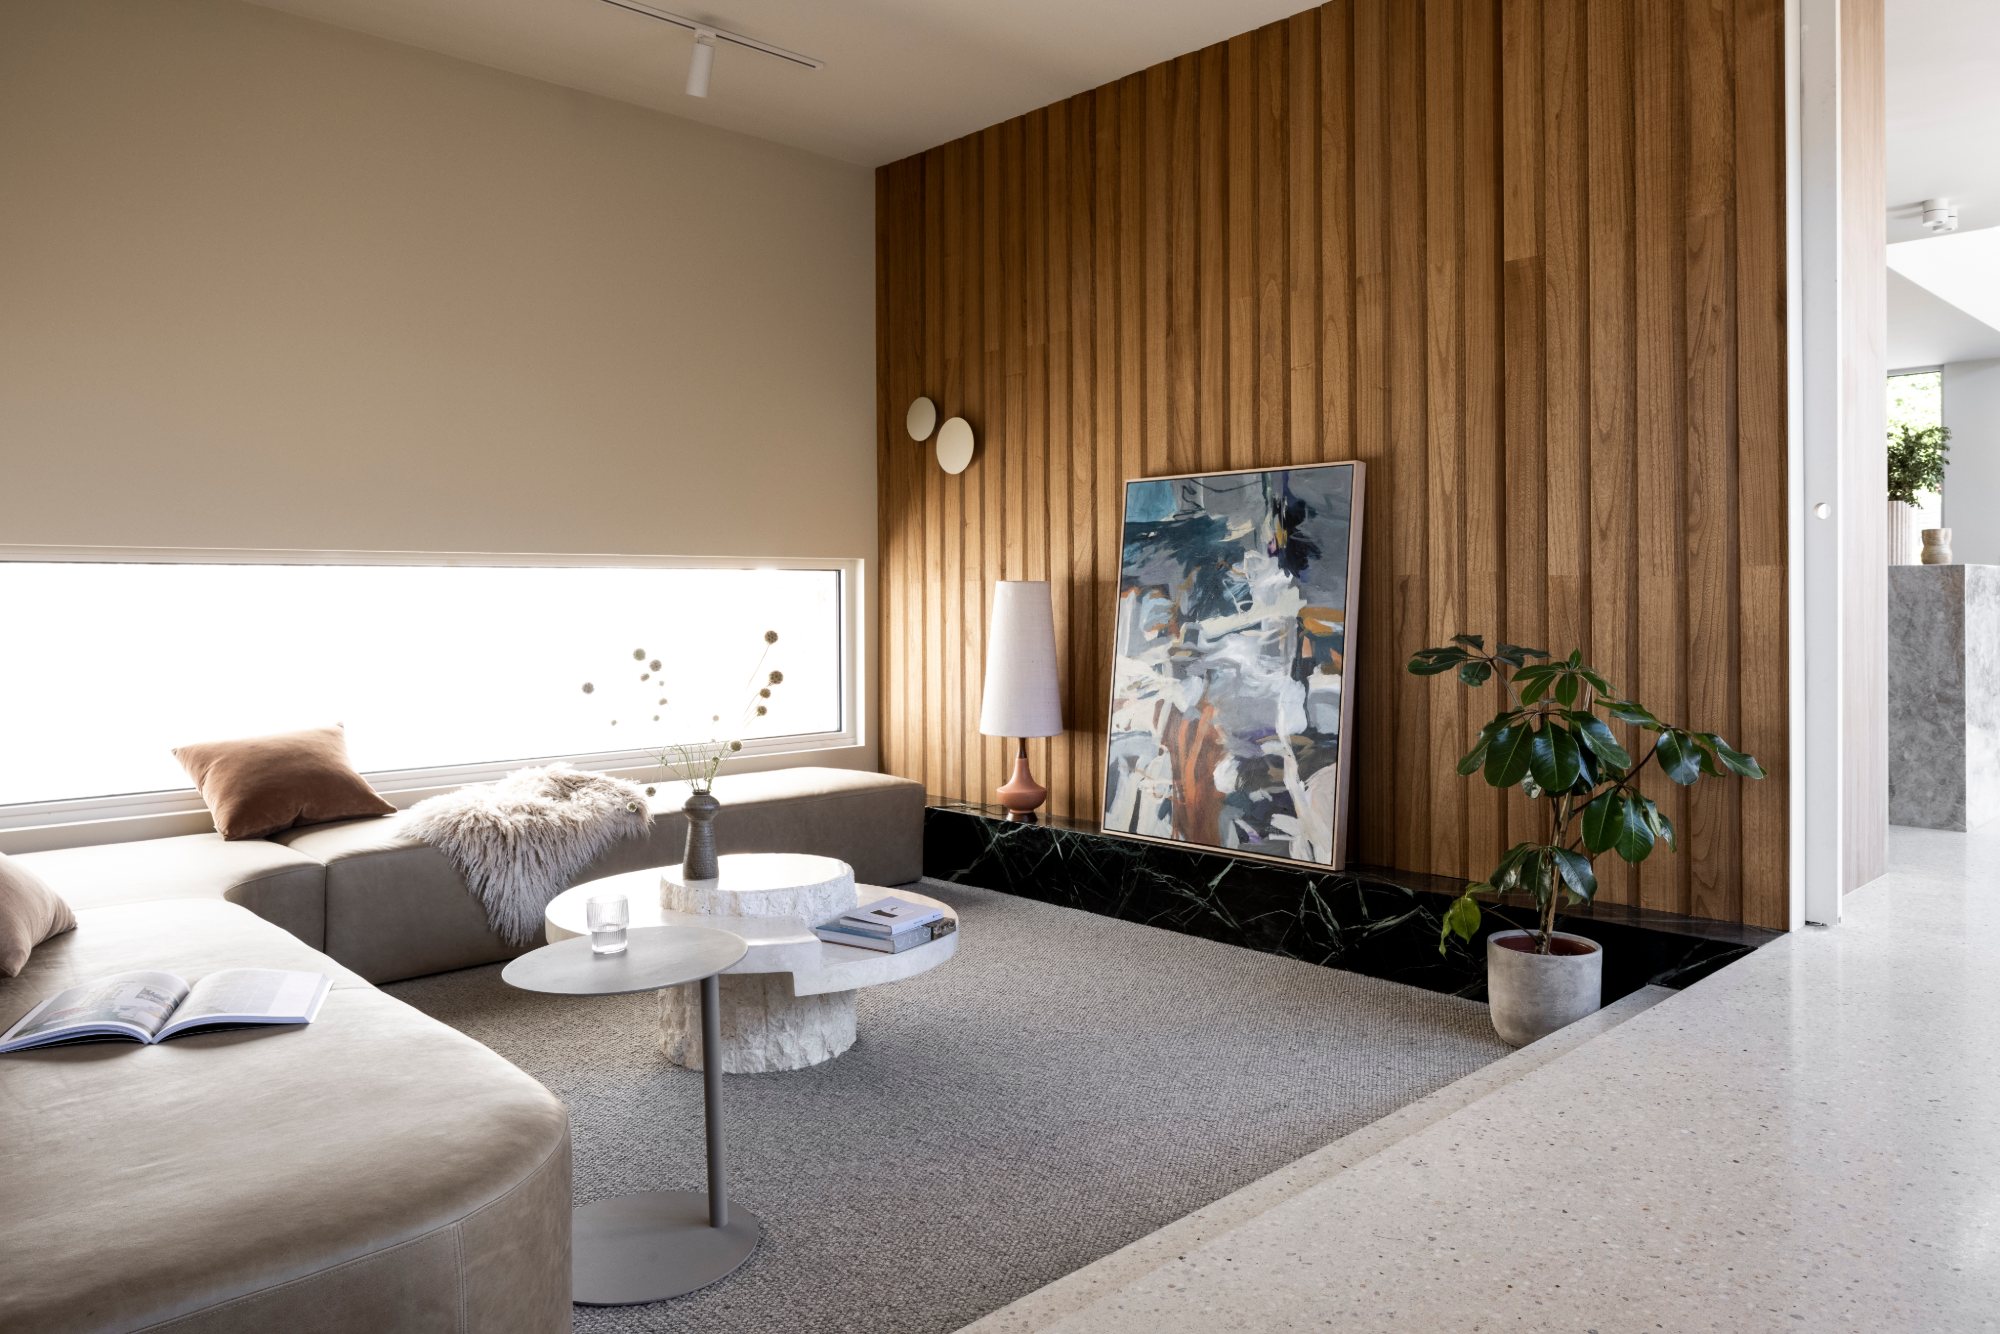 Image of North House 002 in Love, care and beauty in every corner of this Australian home - Cosentino